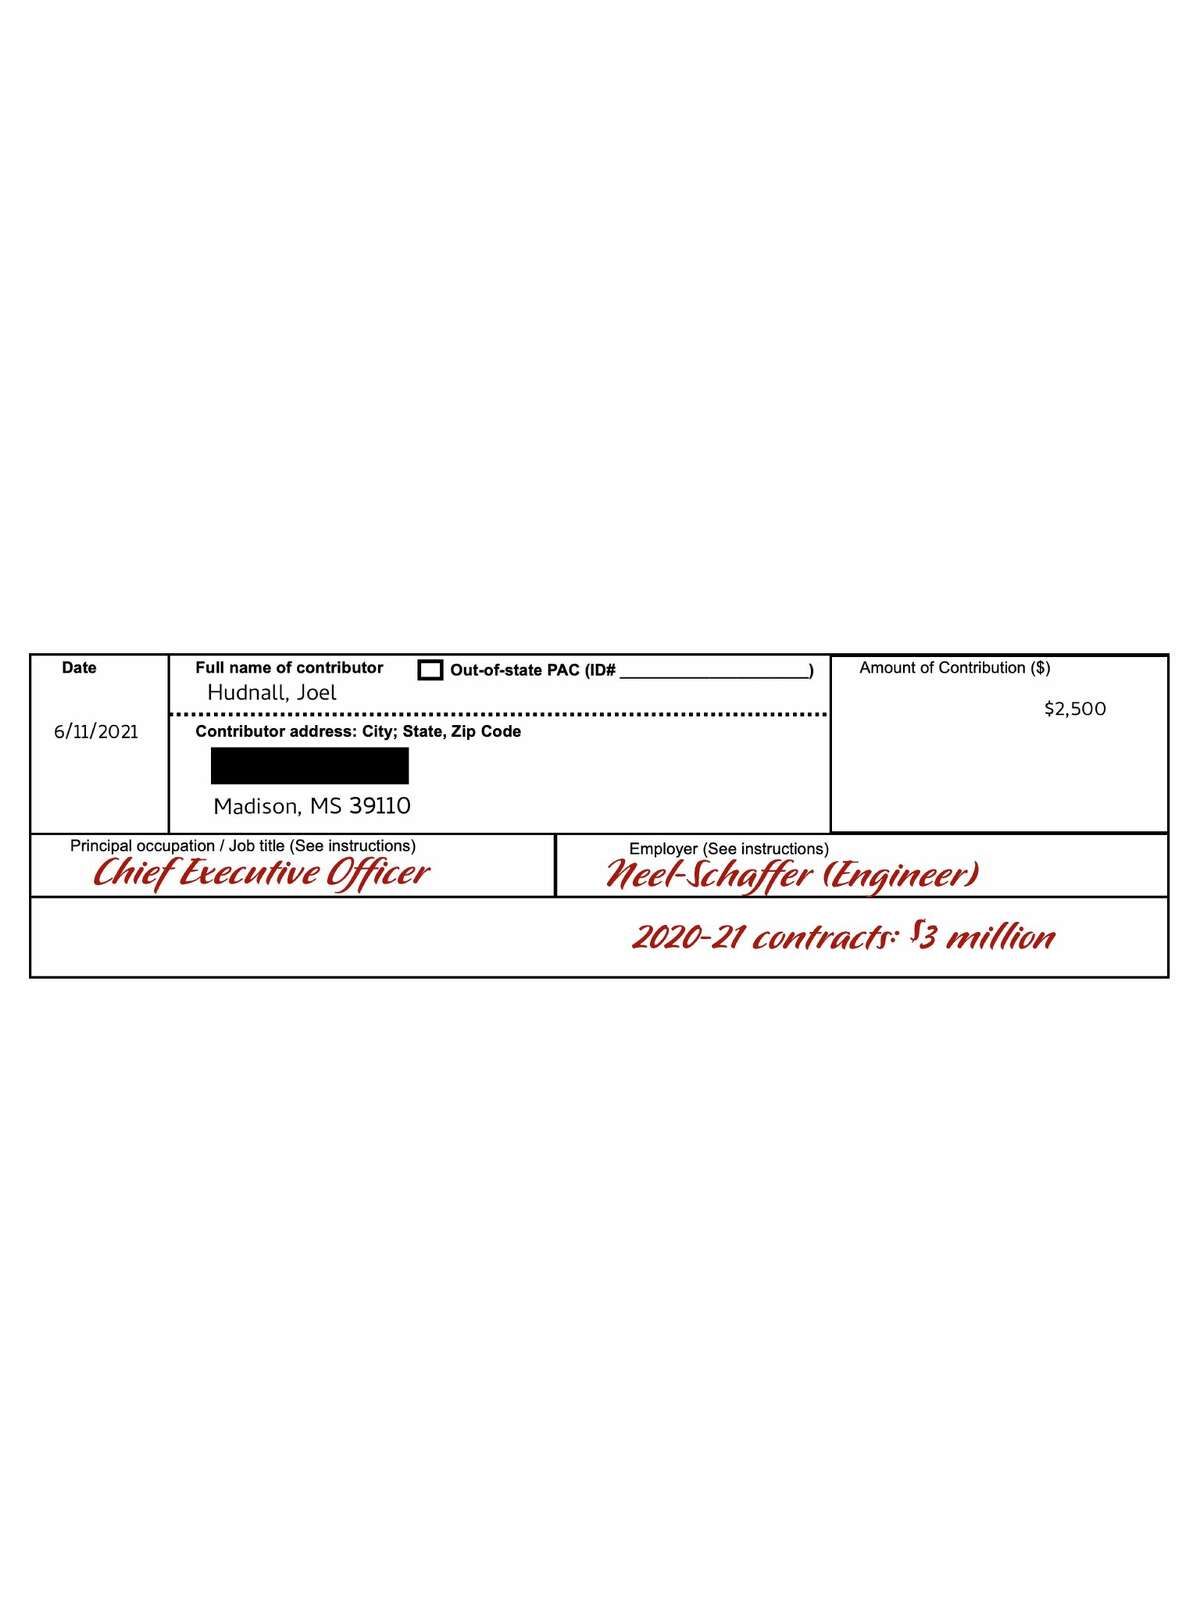 Same campaign contribution form filled out with actual company name and contribution amount